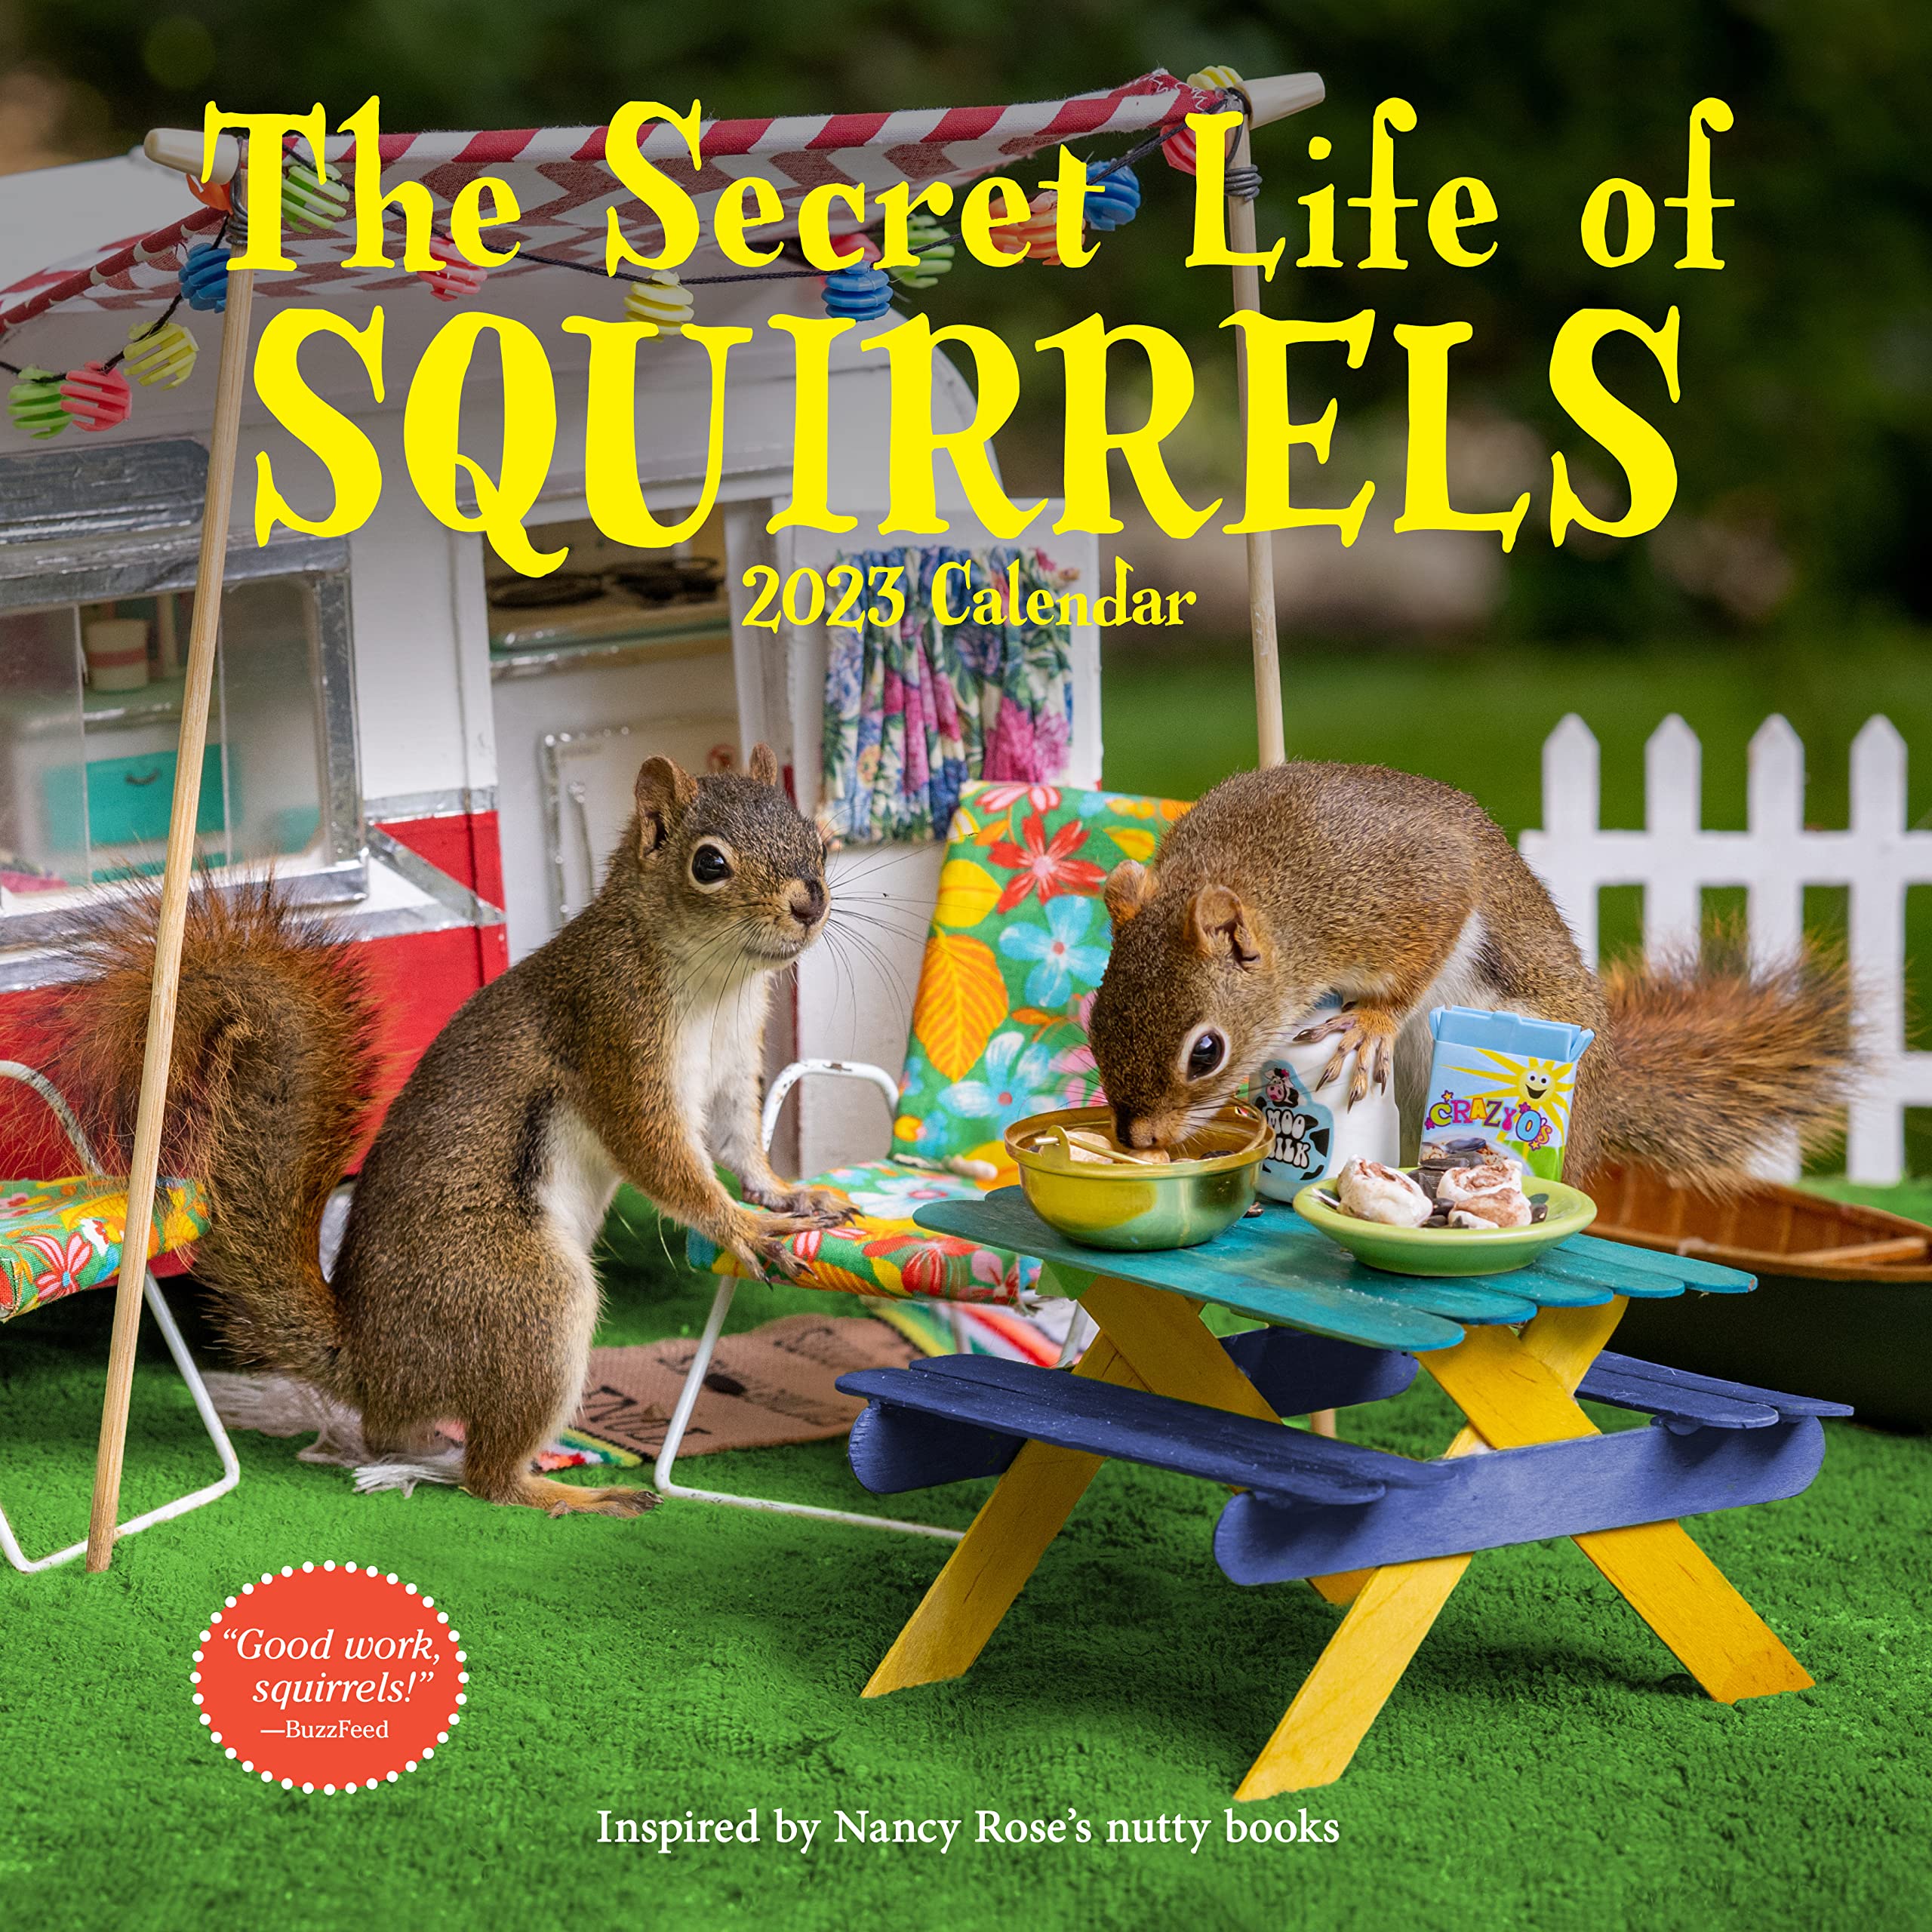 Secret Life Of Squirrels Wall Calendar cover image for 2023